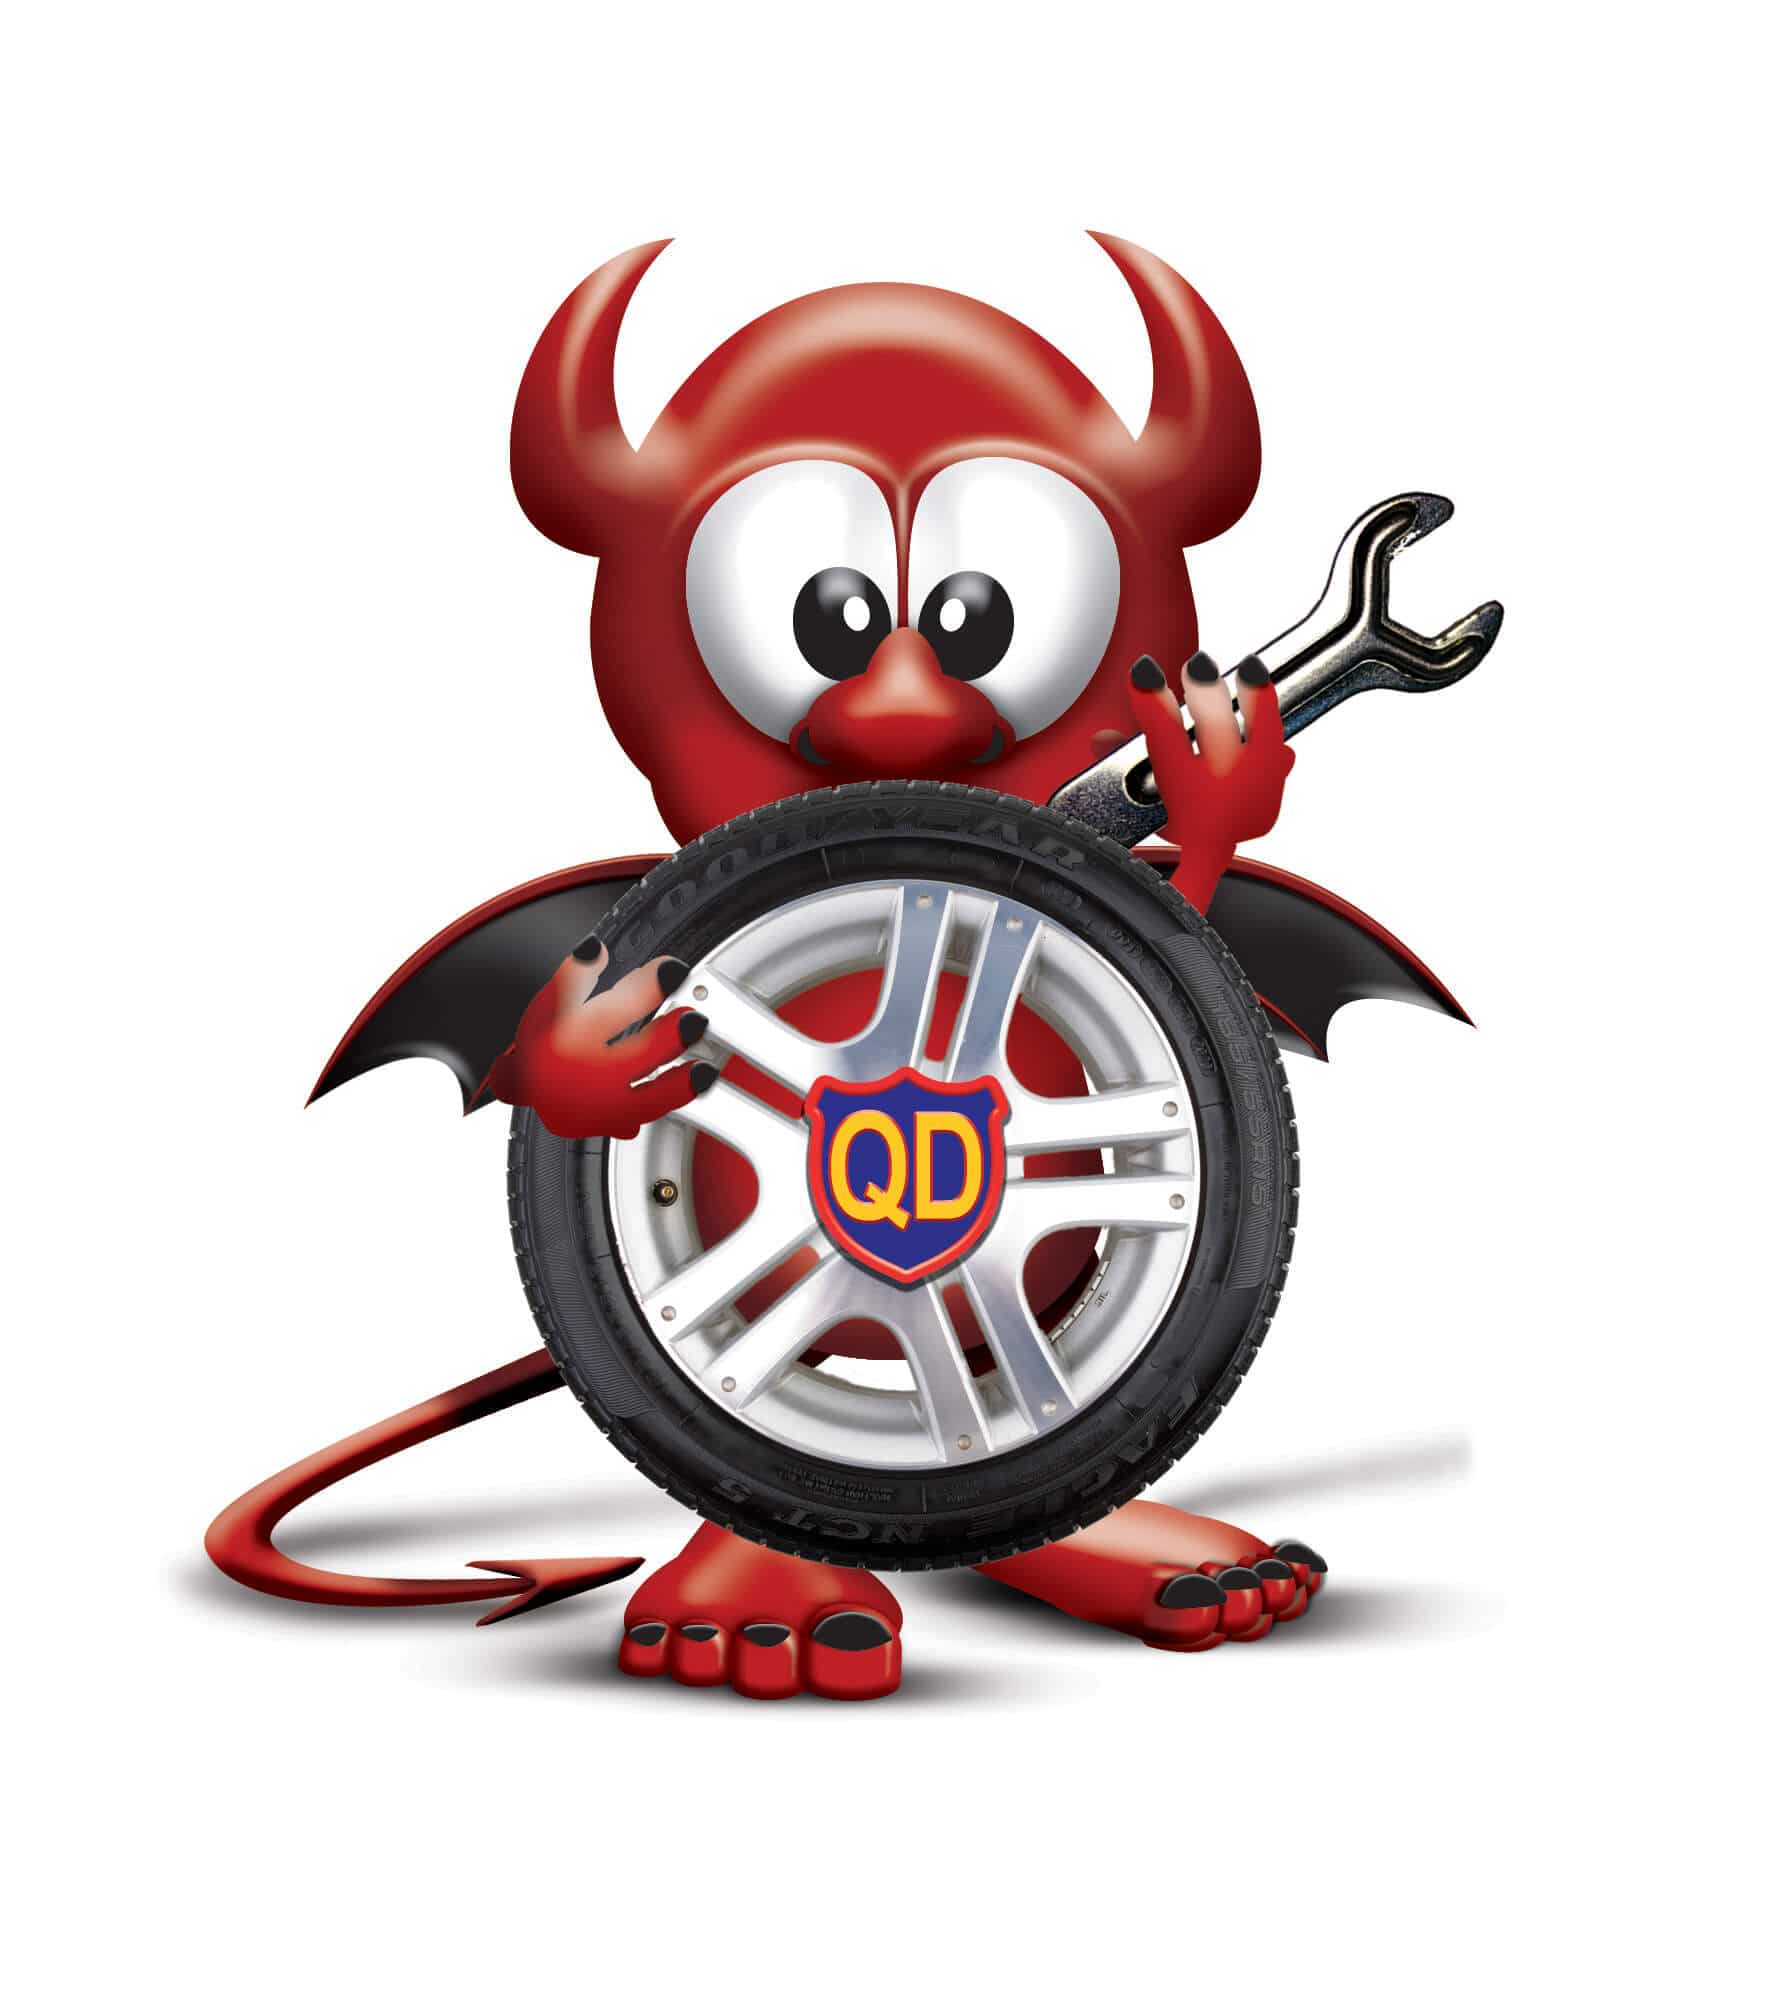 Quote Devil Holding a Wheel and Wrench